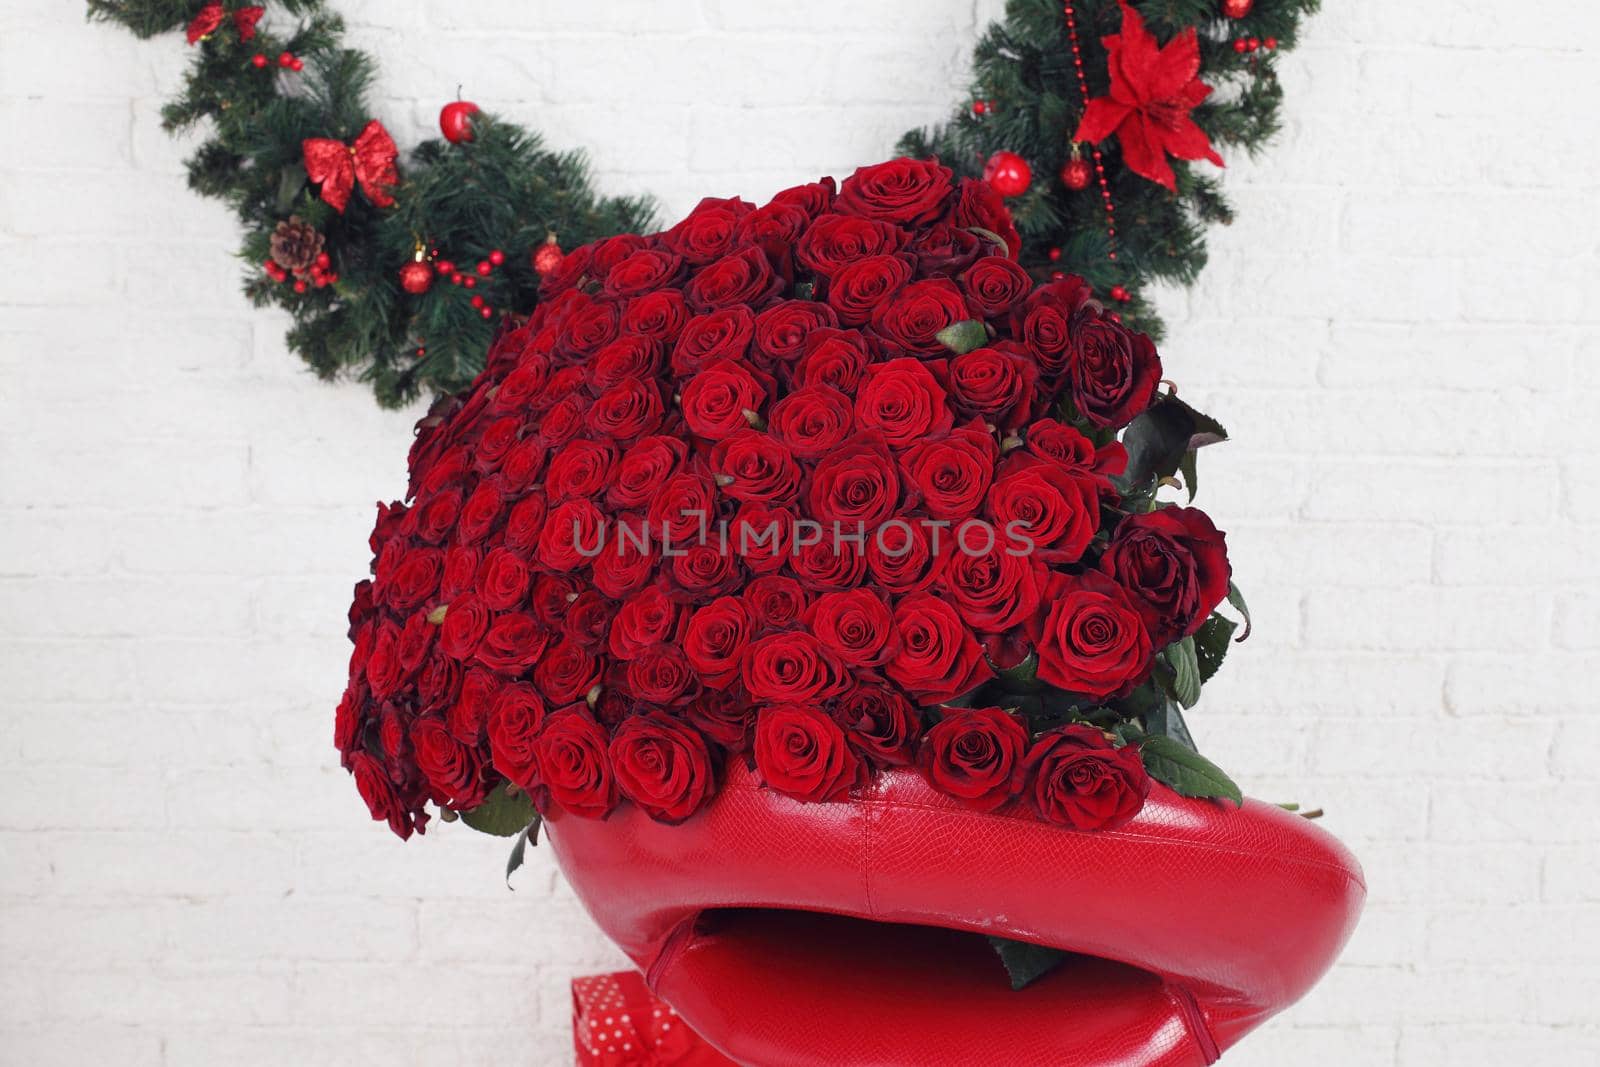 Big Red Roses Bouquet over white by IvanGalashchuk